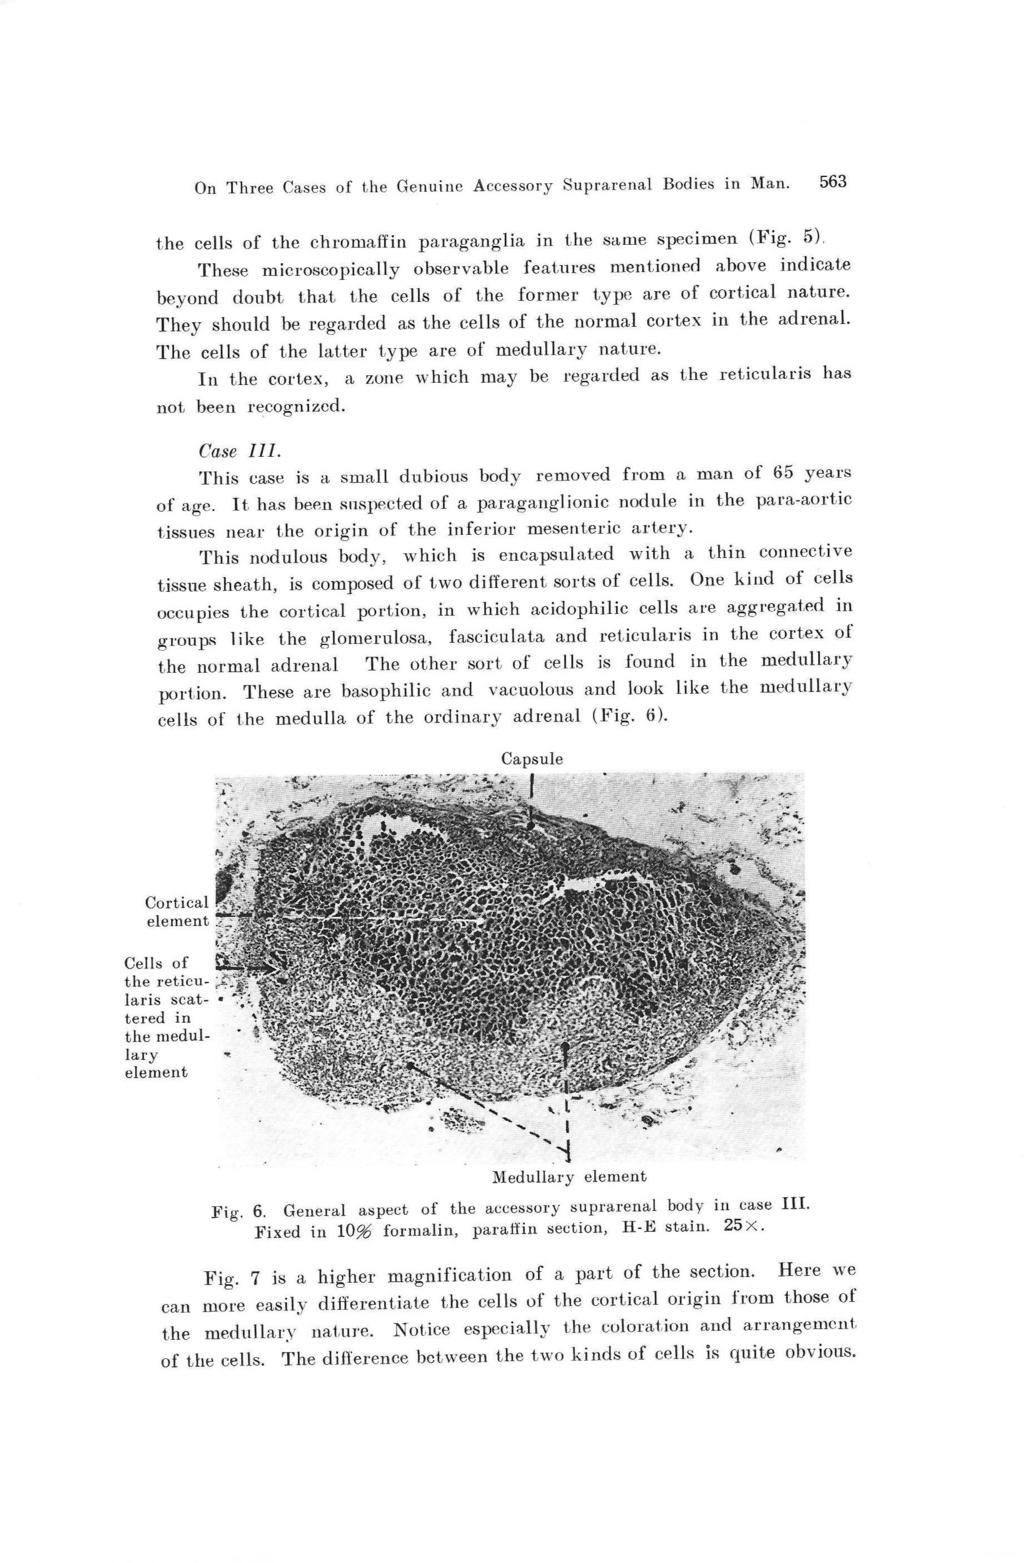 On Three Cases of the Genuine Accessory Suprarenal Bodies in Man. 563 the cells of the chromaffin paraganglia in the same specimen (Fig. 5).